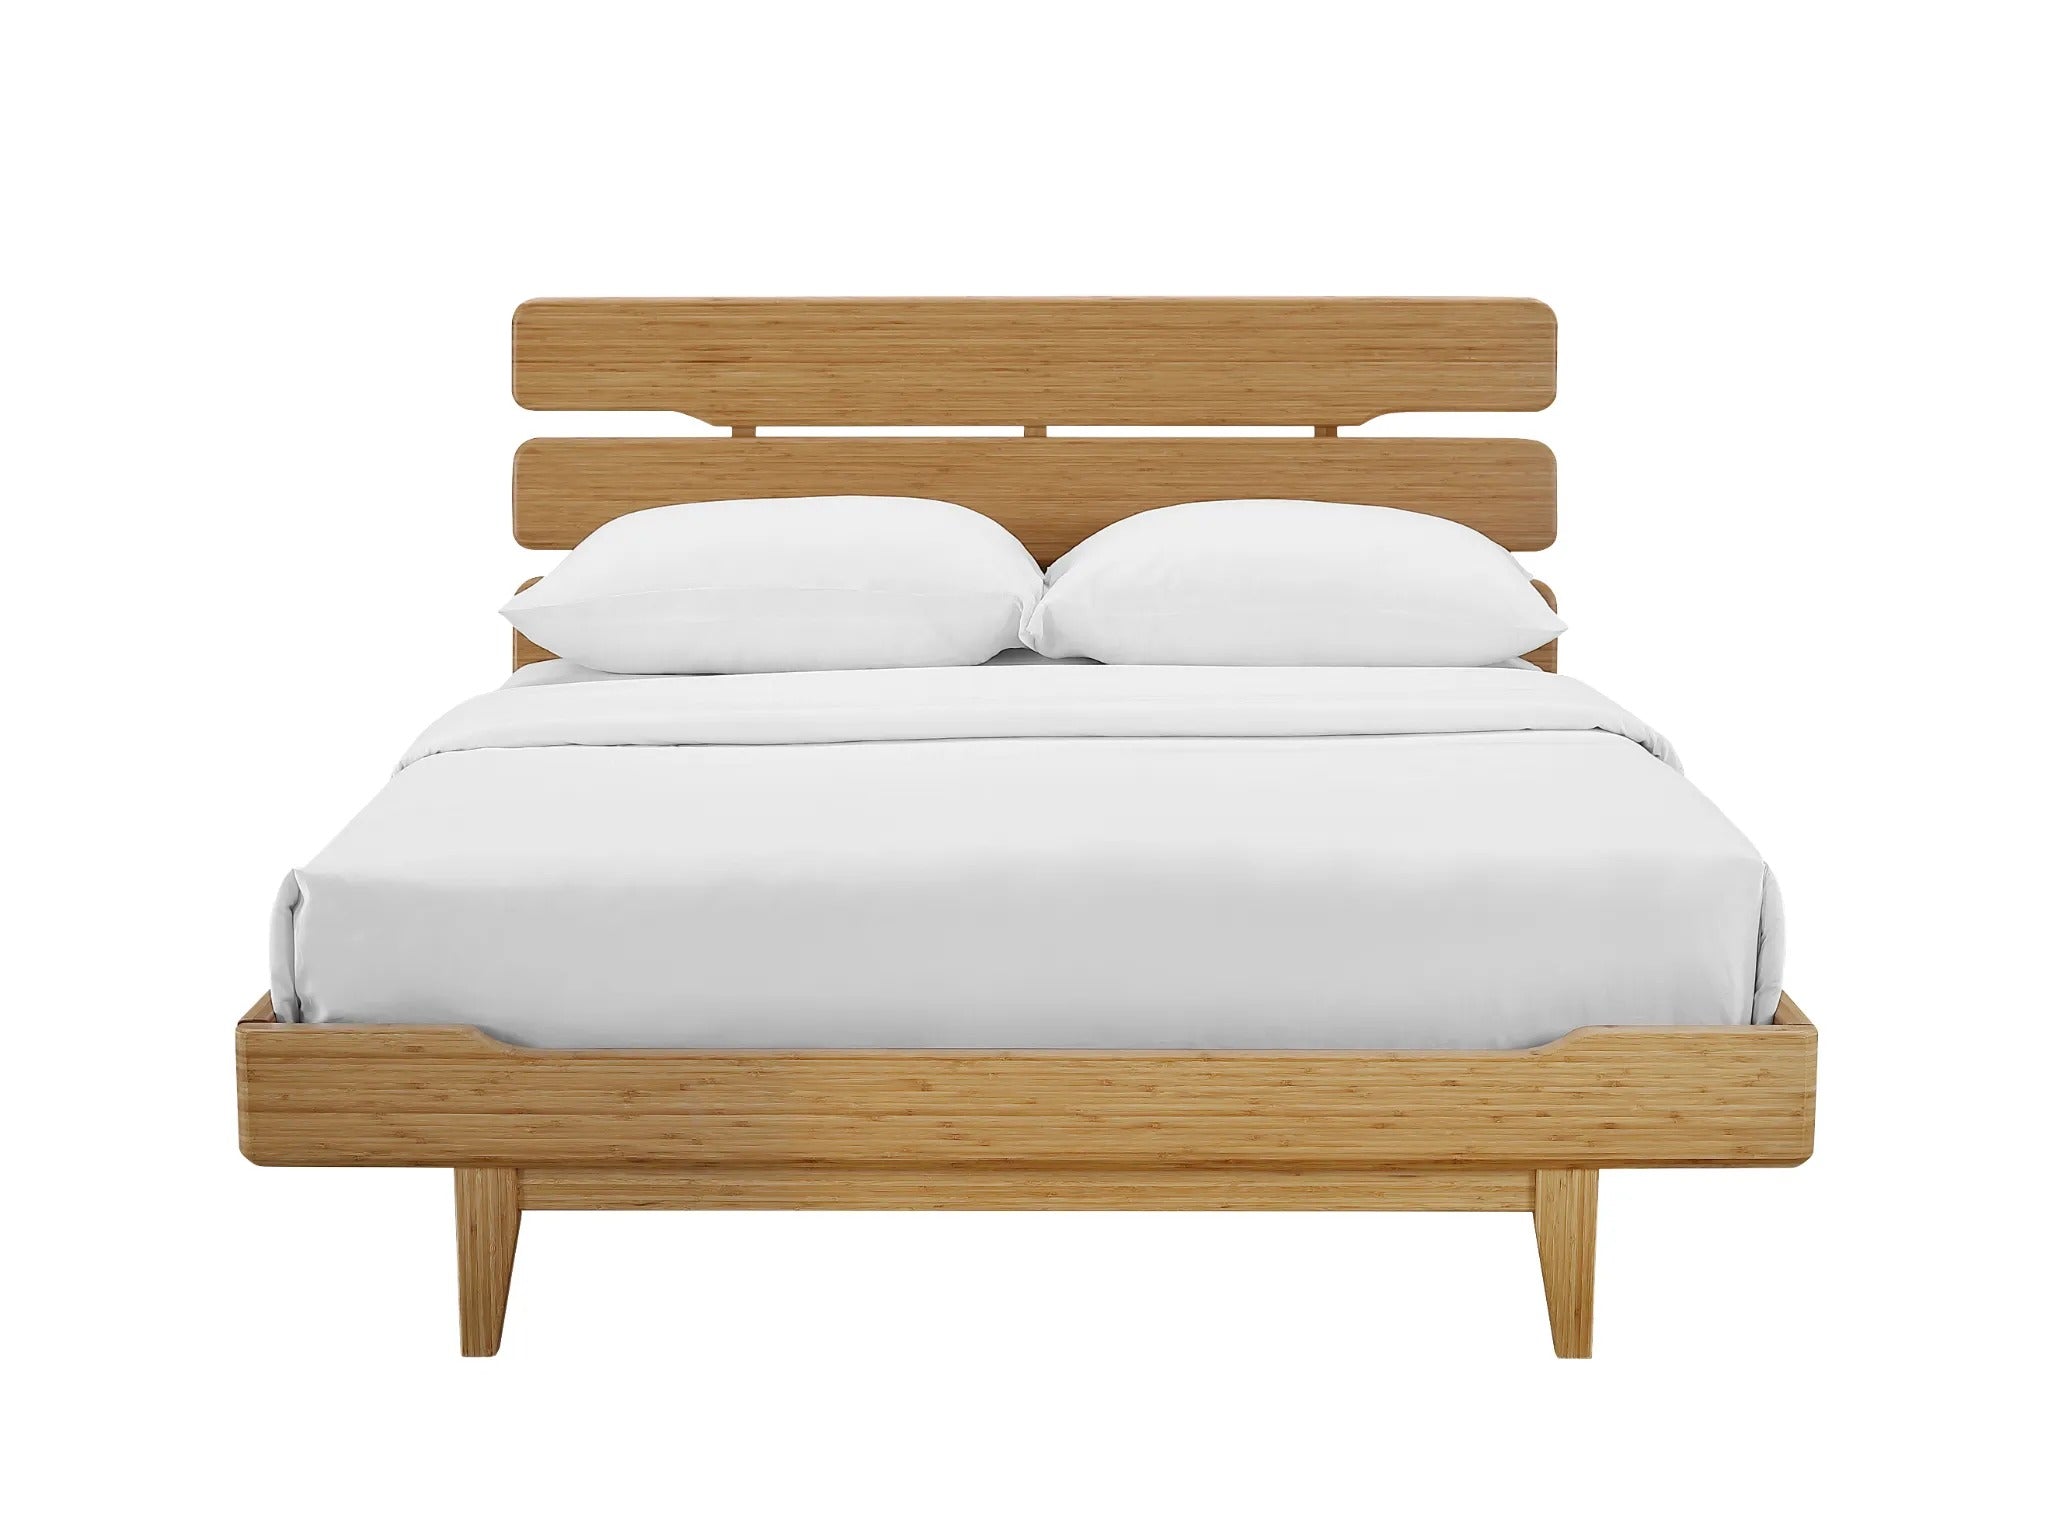 Currant Bamboo Bedframe